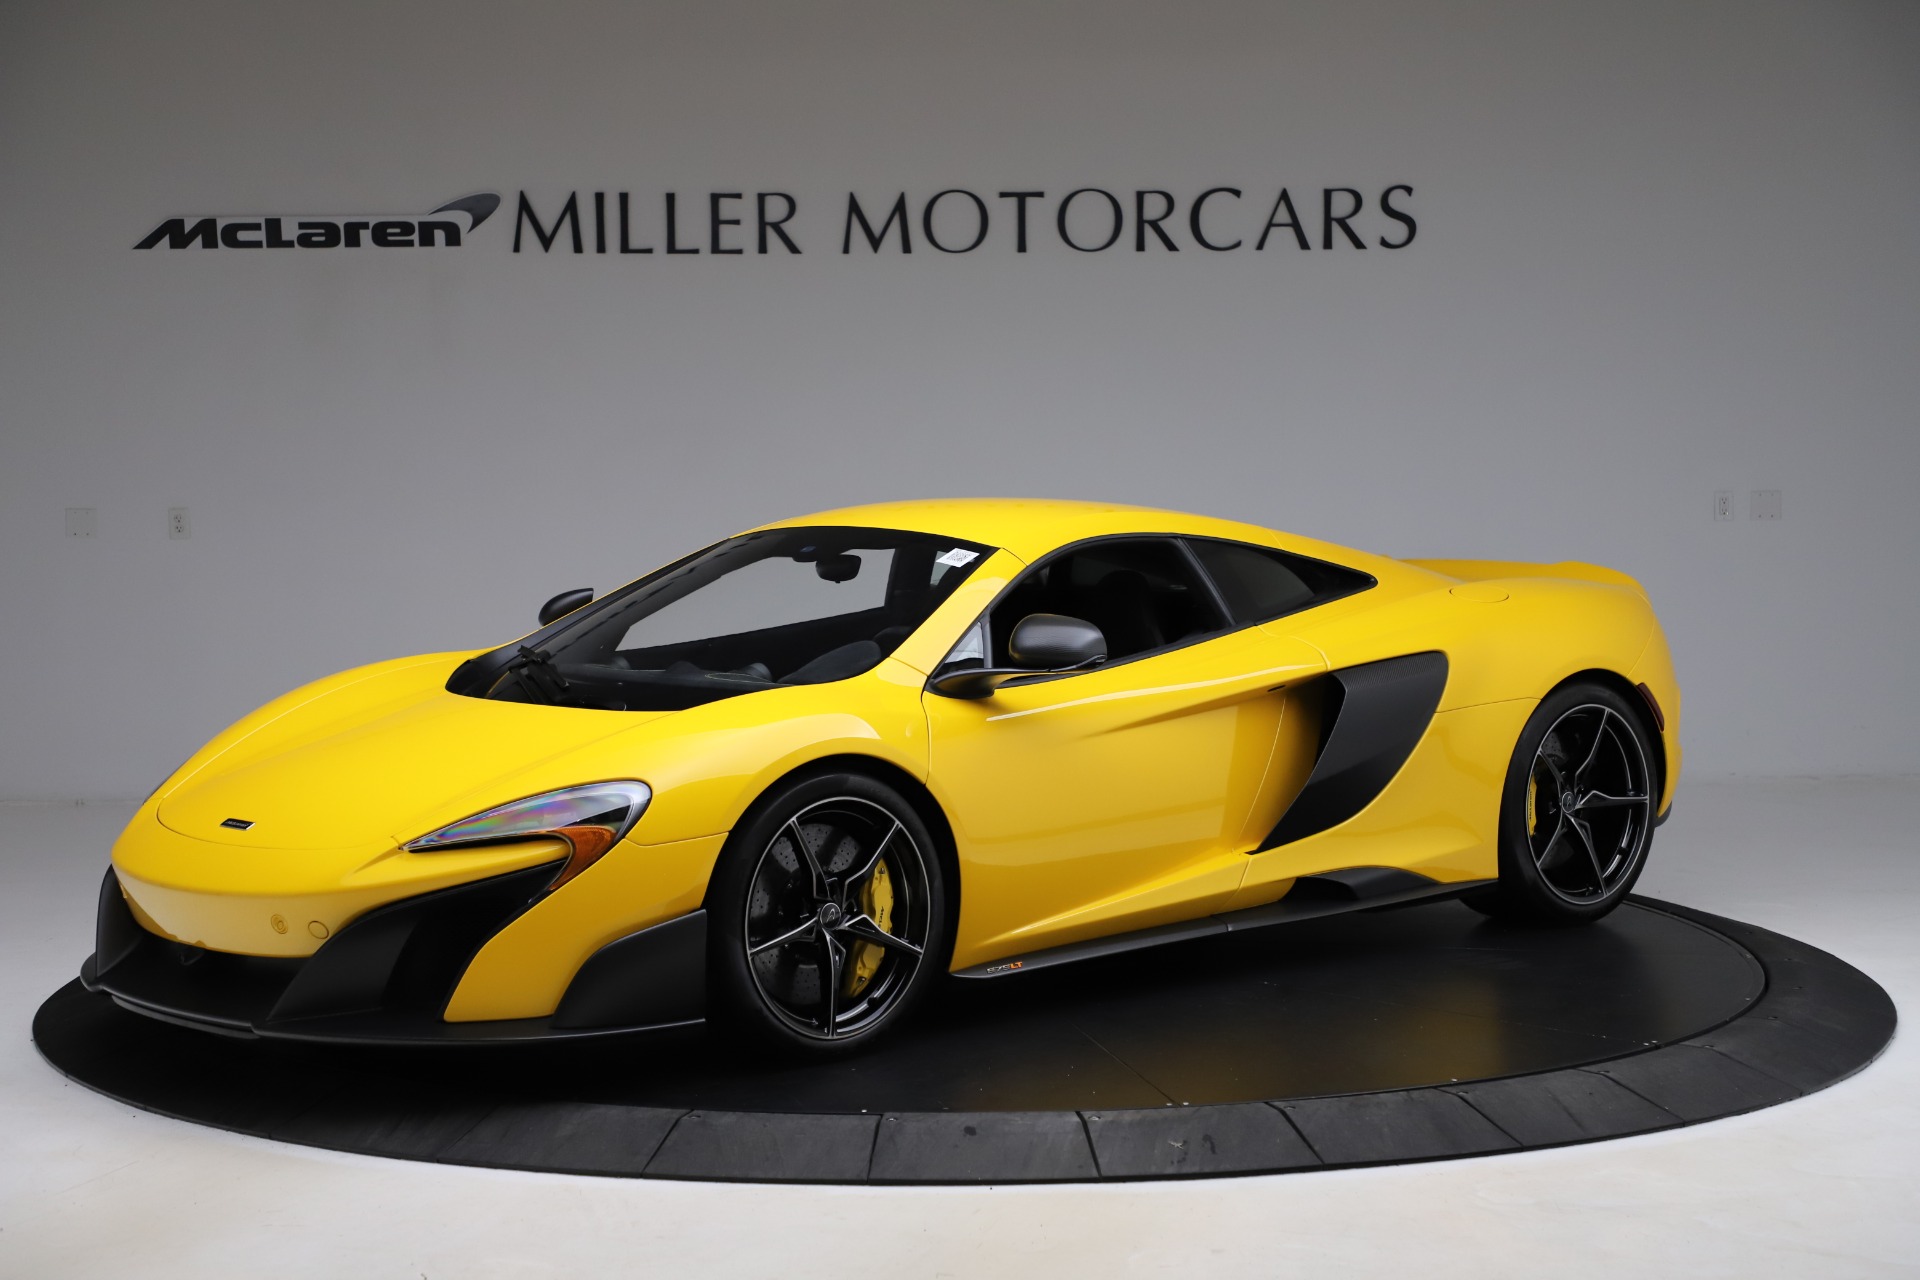 Used 2016 McLaren 675LT for sale Sold at McLaren Greenwich in Greenwich CT 06830 1